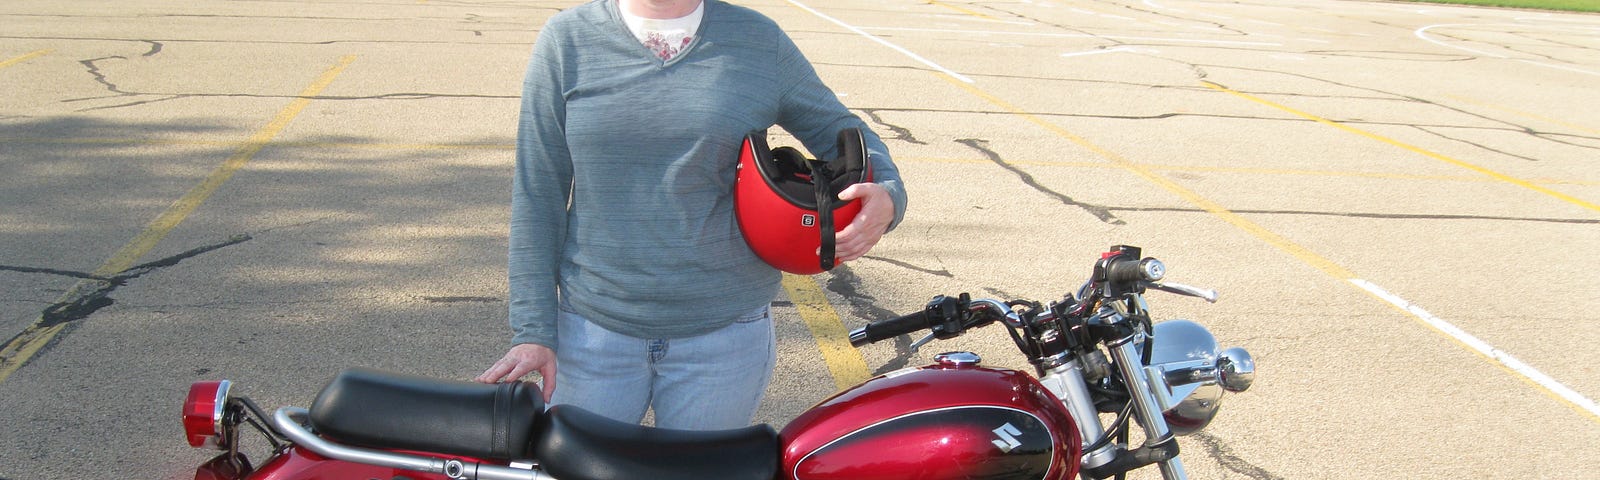 This shows a woman standing behind a red motorcycle.